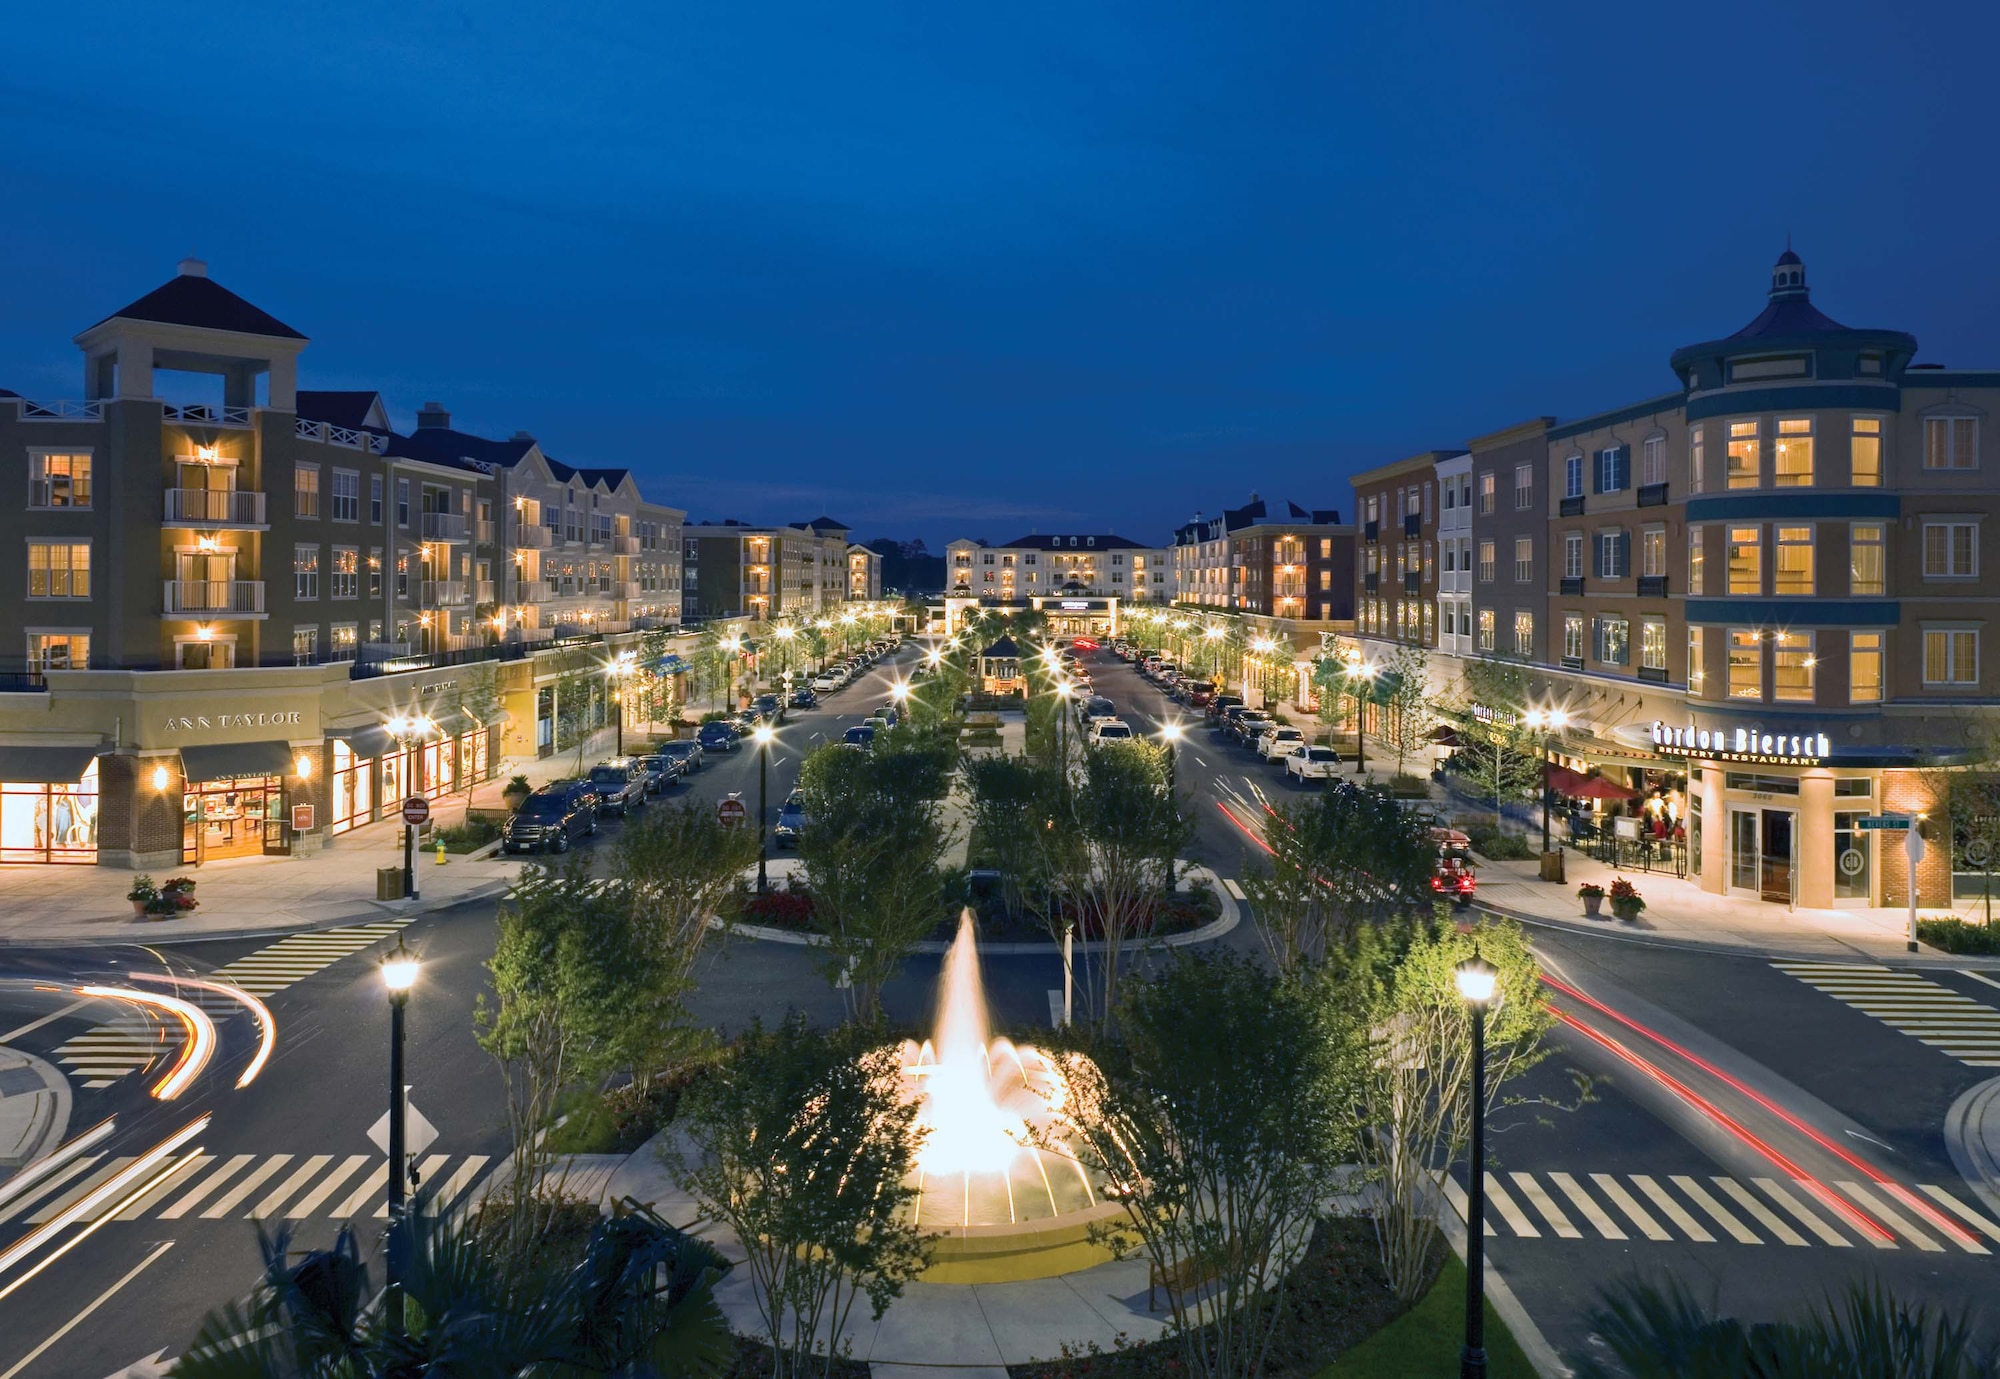 Redevelopment projects at the former Myrtle Beach AFB include the Market Common, an upscale urbane village offering shopping, dining and residences.
